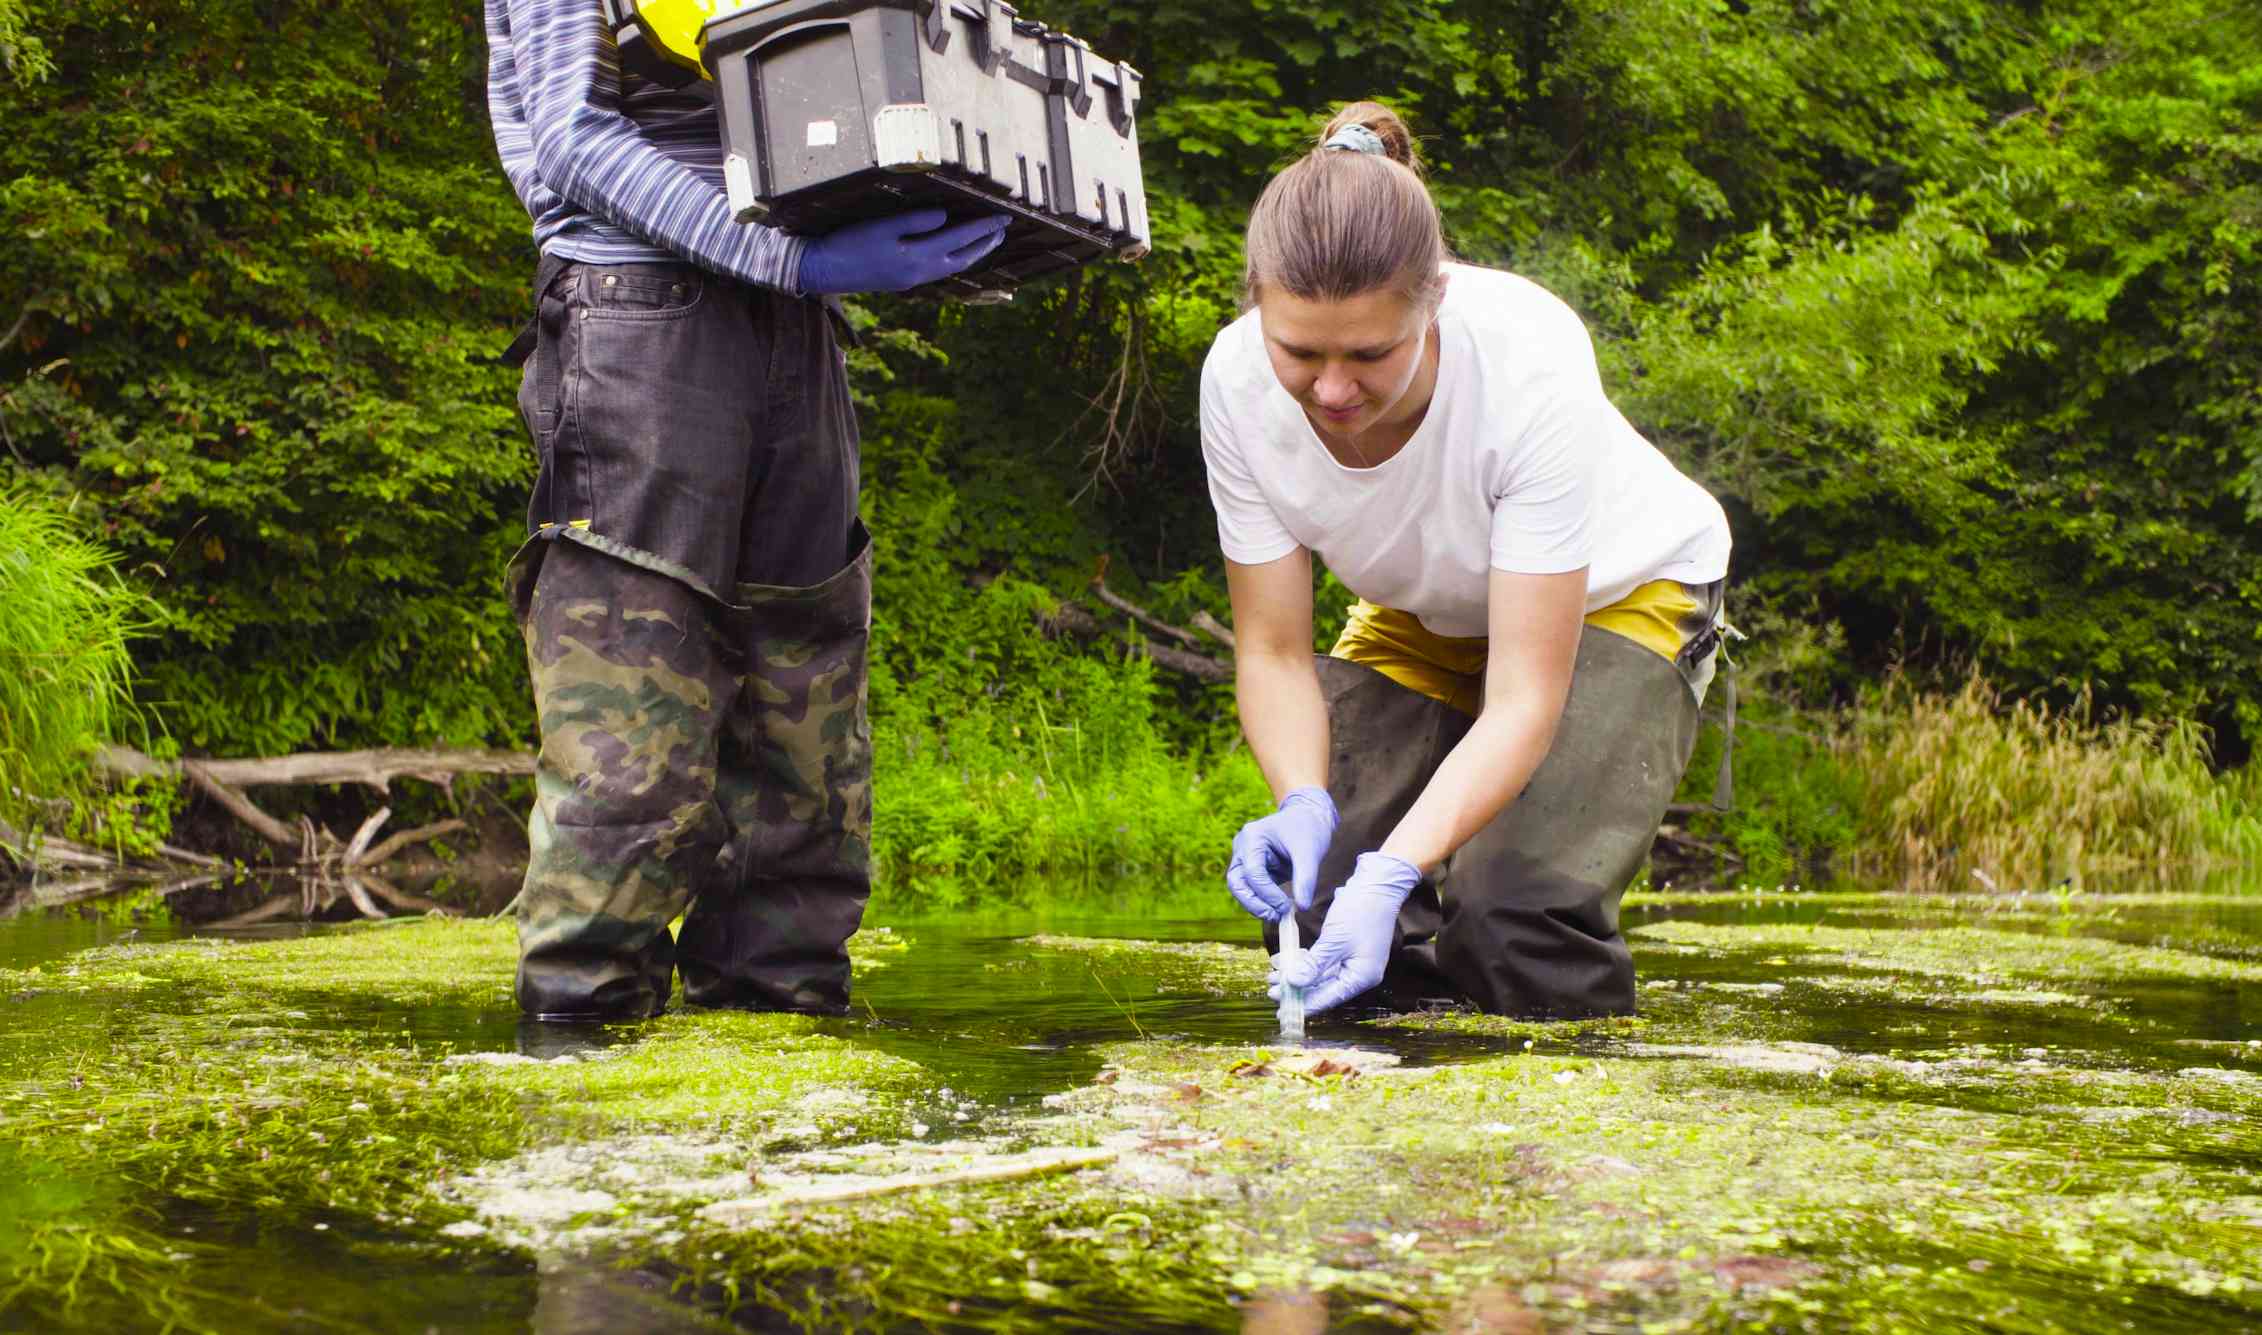 A white woman takes a sample from a body of water. Another person stands next to her carrying a box.